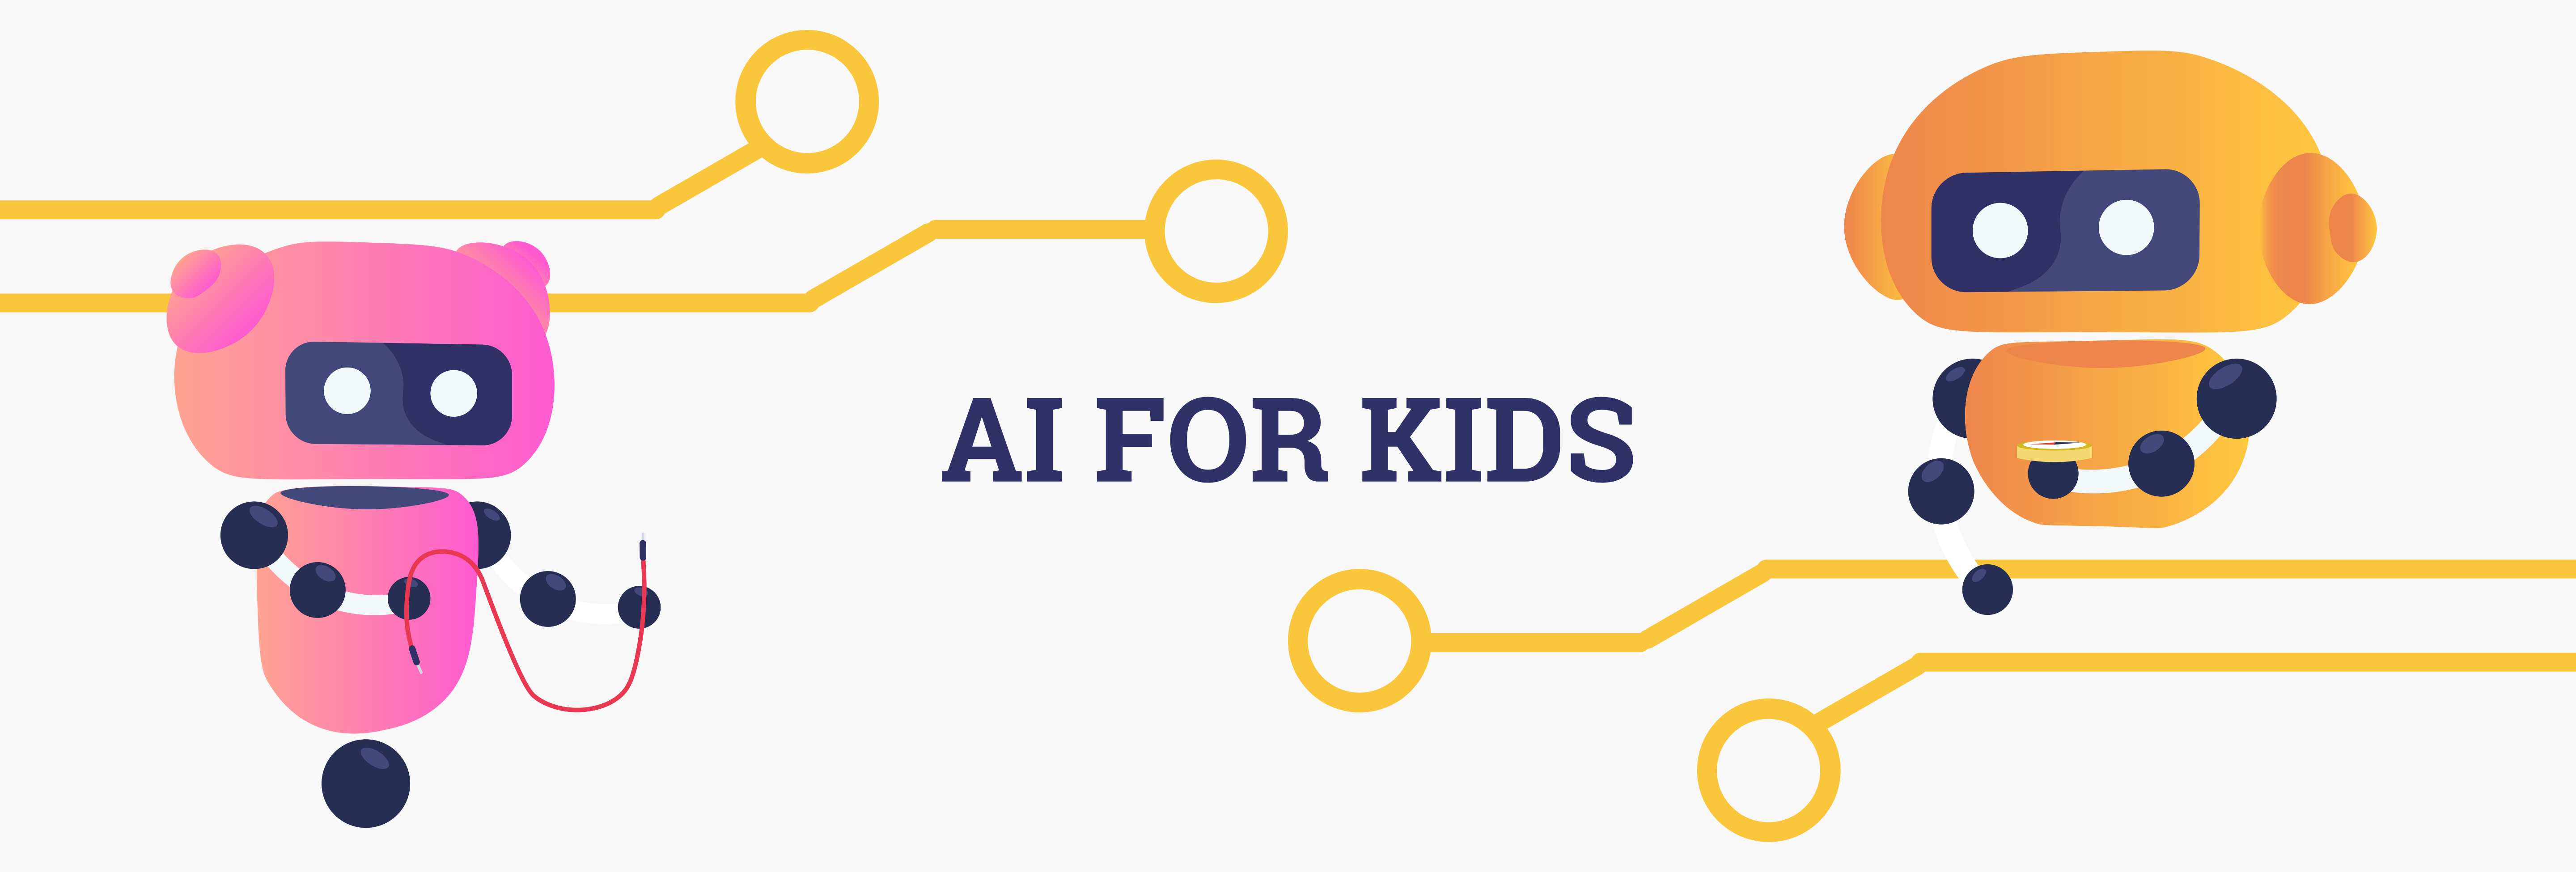 Artificial Intelligence For Kids Online Course On Ai And Ml Using ...